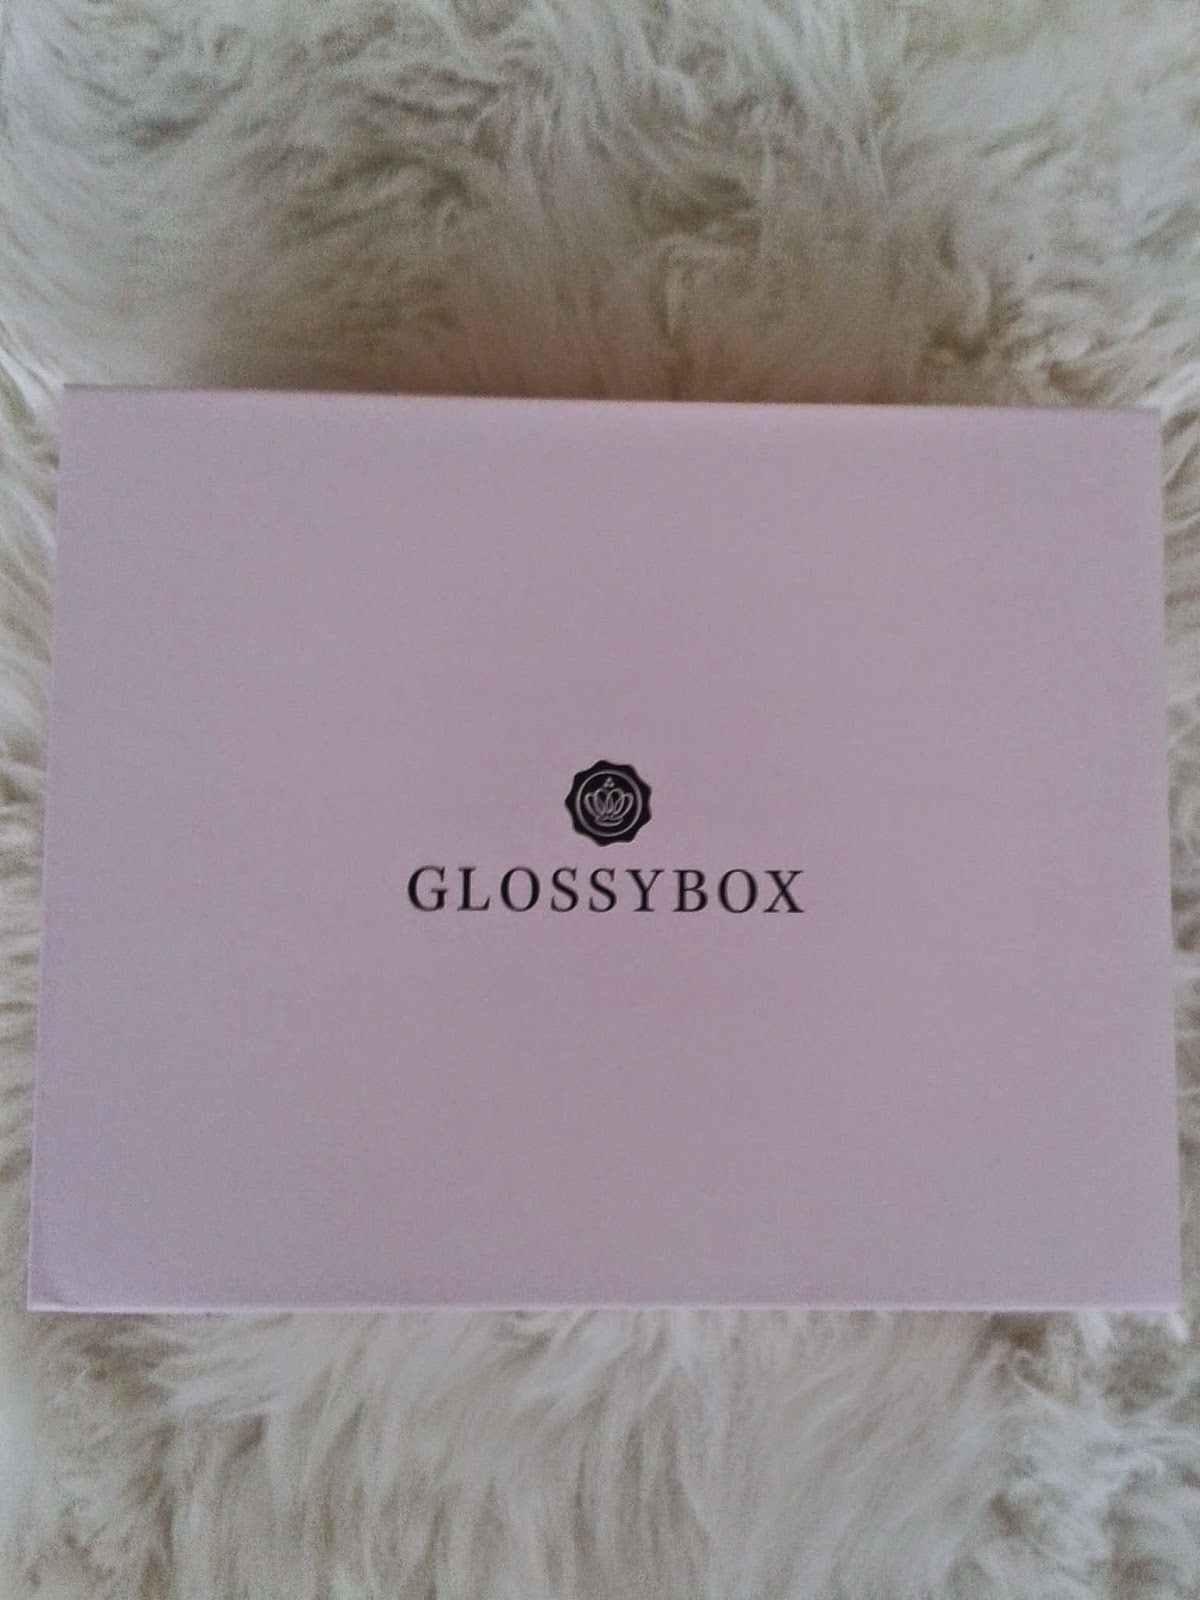 The pink Glossybox